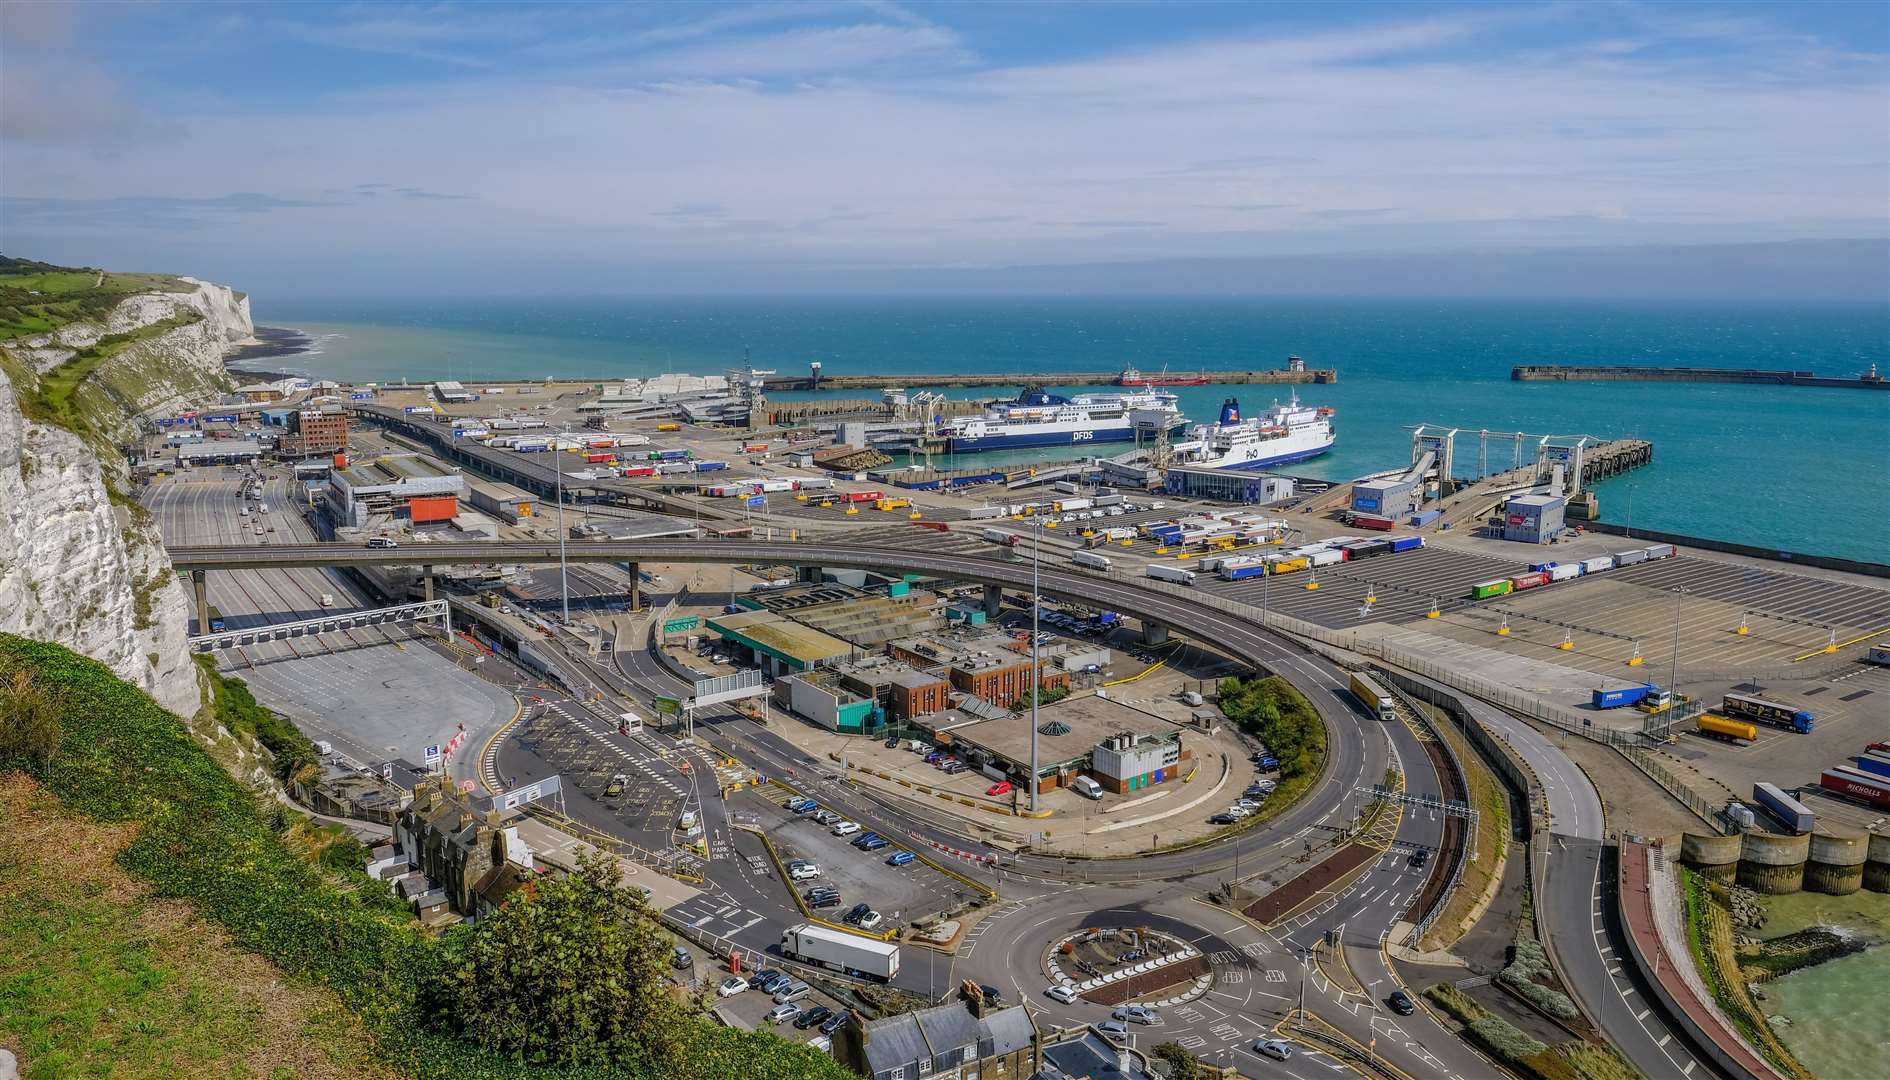 The Port of Dover is on course to reach Net Zero (including direct emissions and purchased energy) by 2025. Credit: Shutterstock